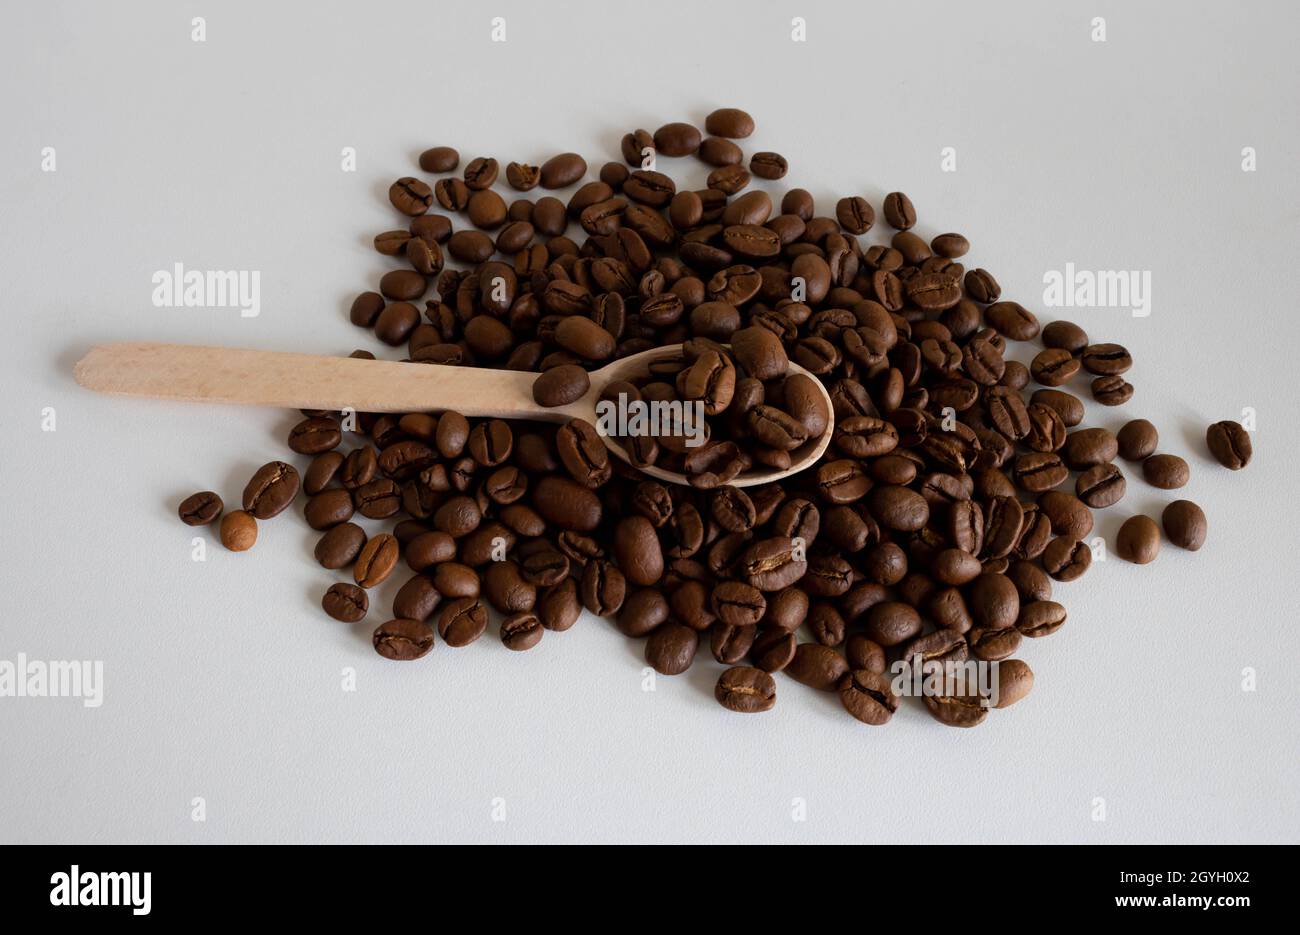 Aromatic coffee beans in a wooden spoon, for the production of delicious coffee. Whole roasted coffee beans for grinding. Stock Photo